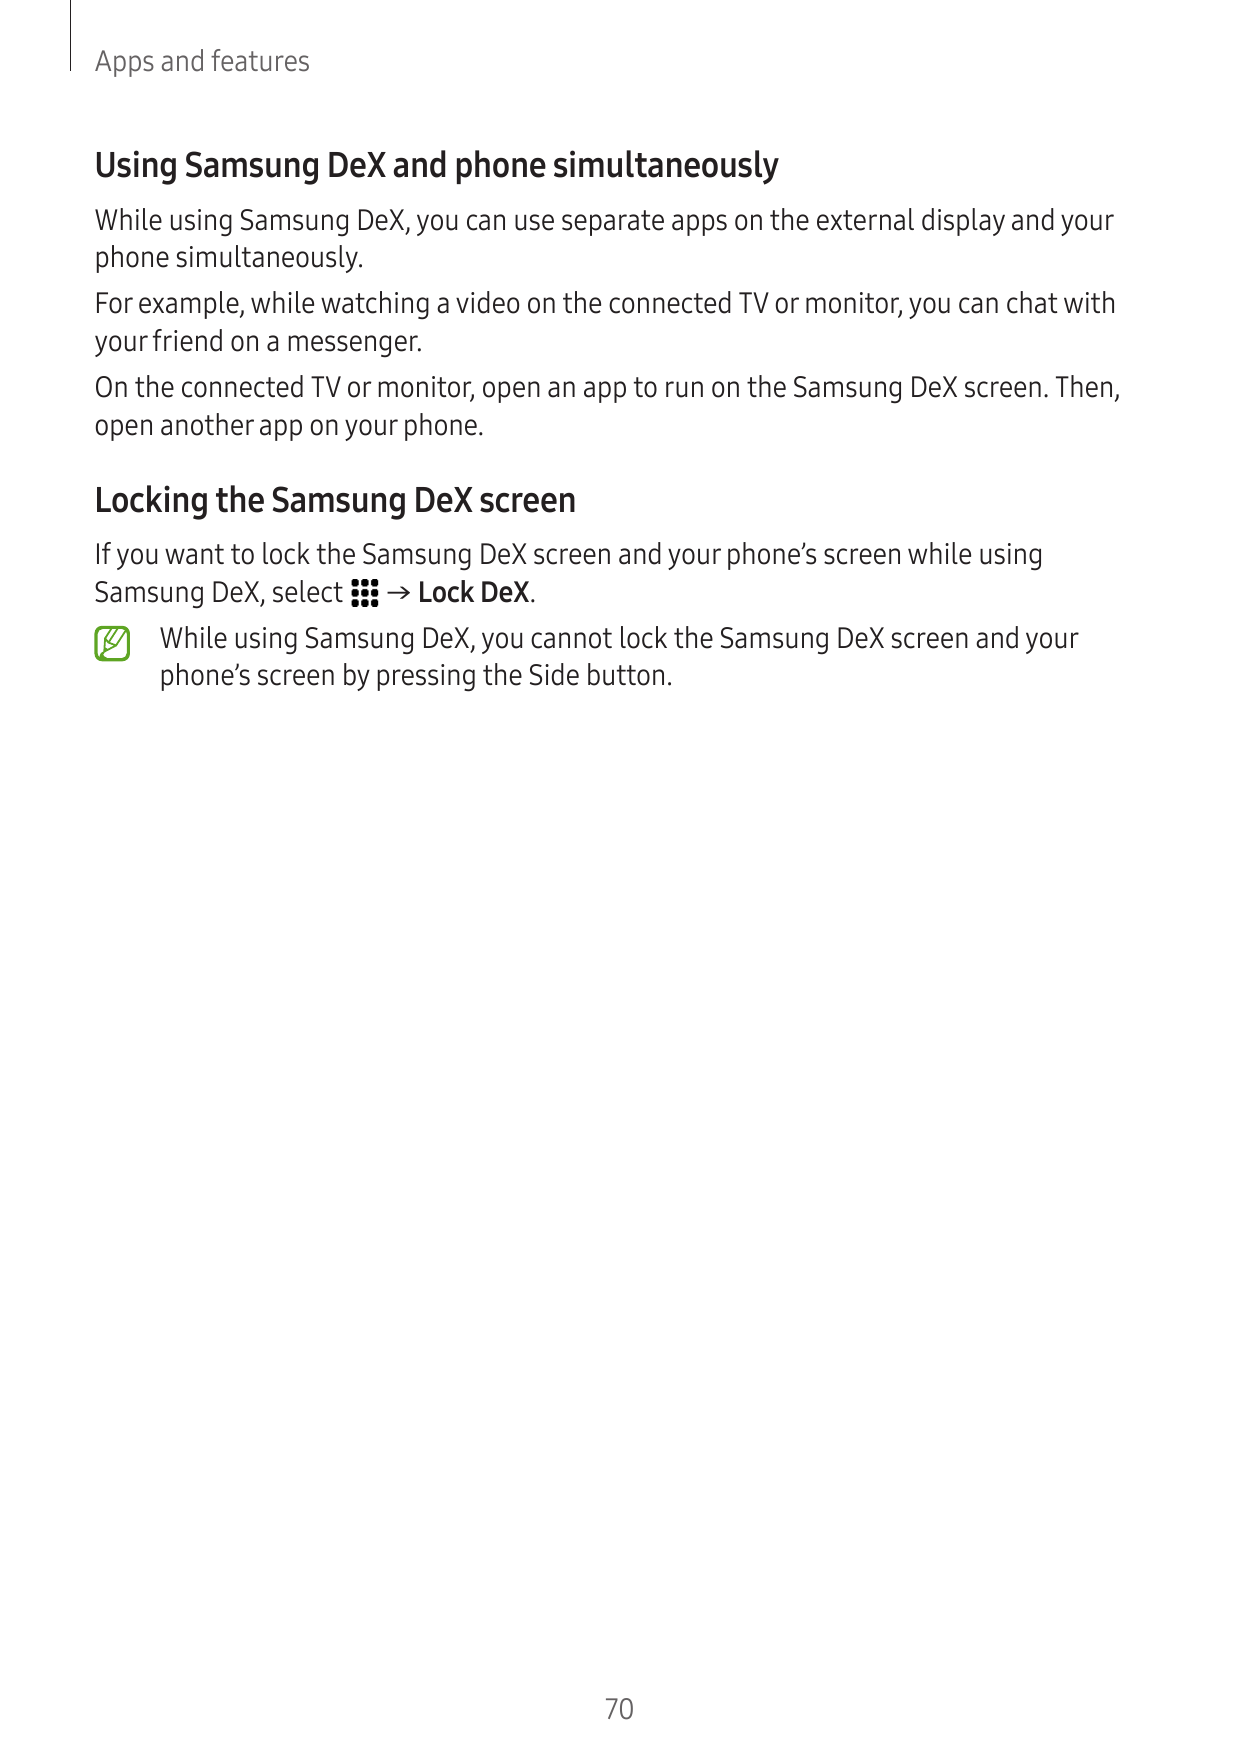 Apps and featuresUsing Samsung DeX and phone simultaneouslyWhile using Samsung DeX, you can use separate apps on the external di